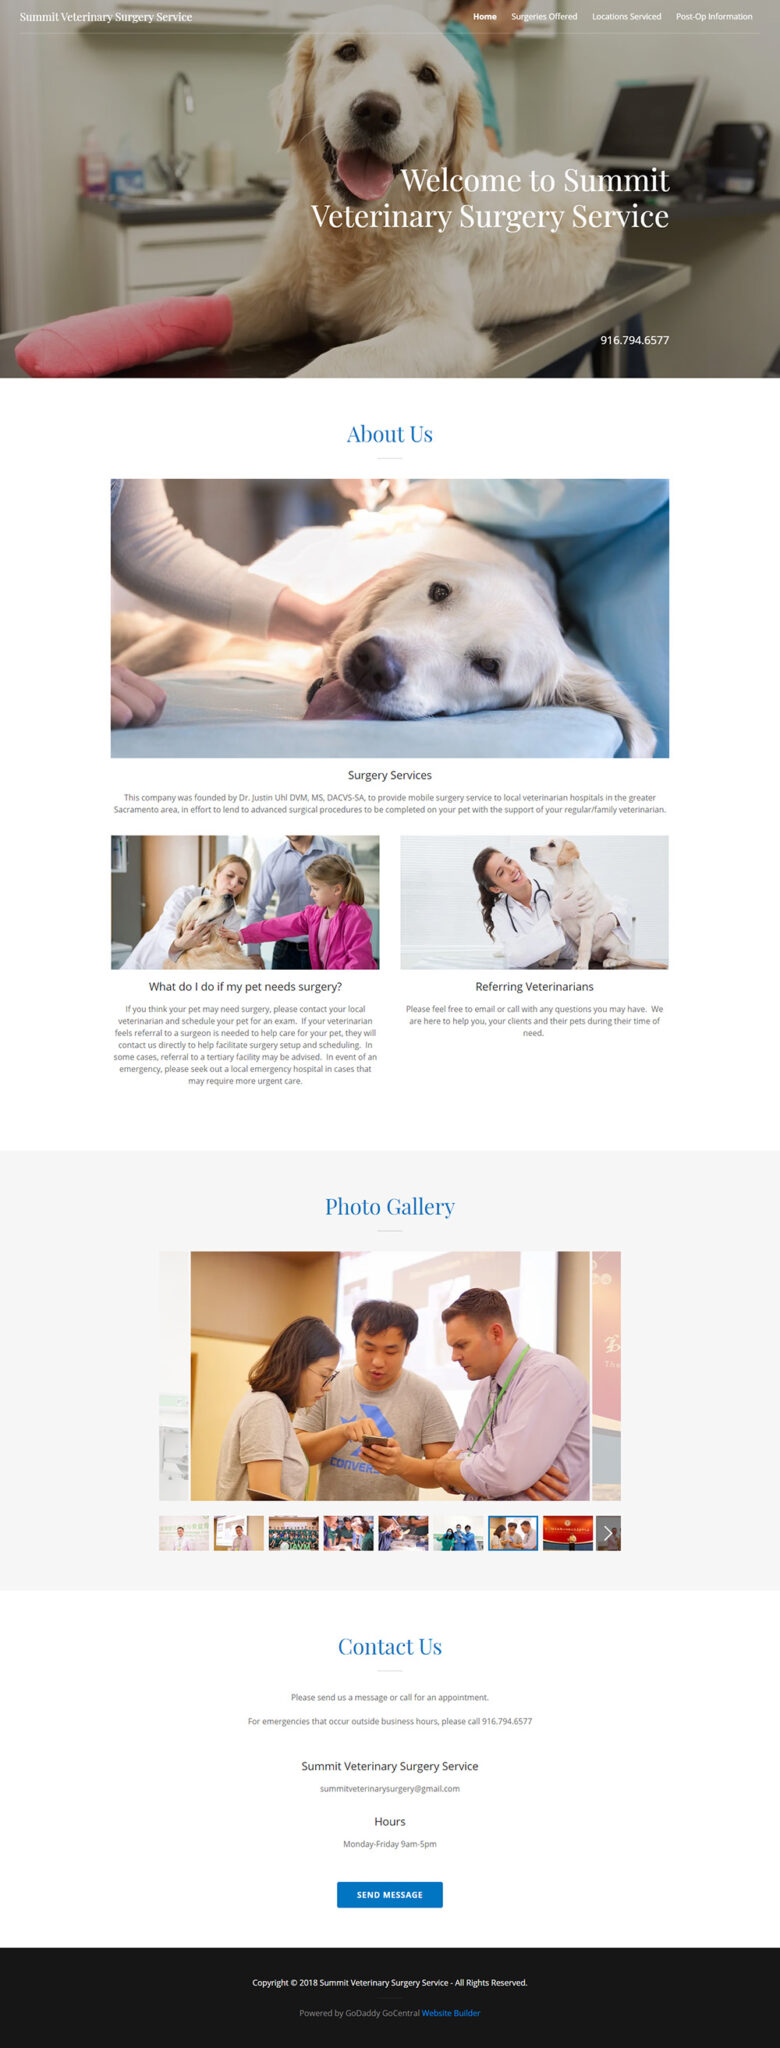 Summit Veterinary Surgery Service home page before redesign